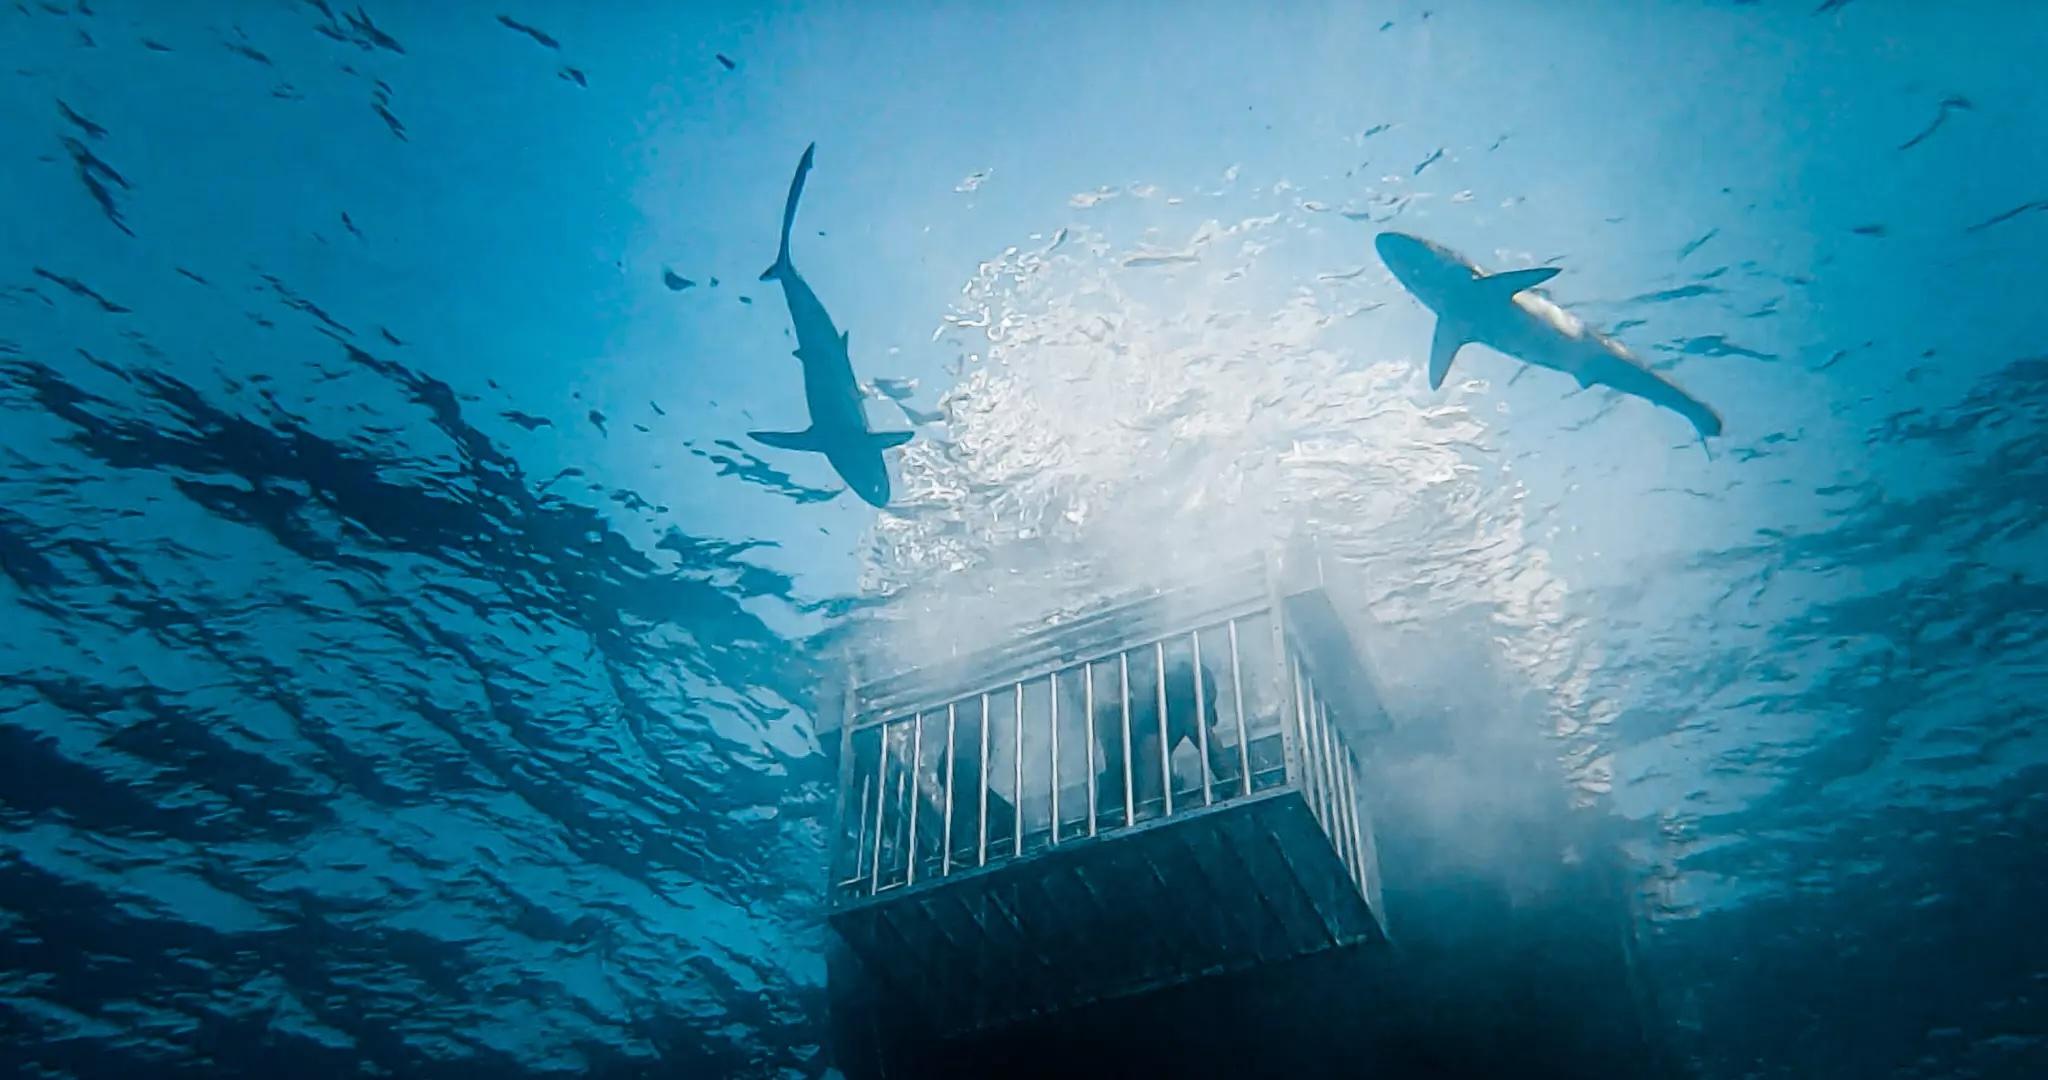 Cage diving with sharks is now possible in Saudi Arabia